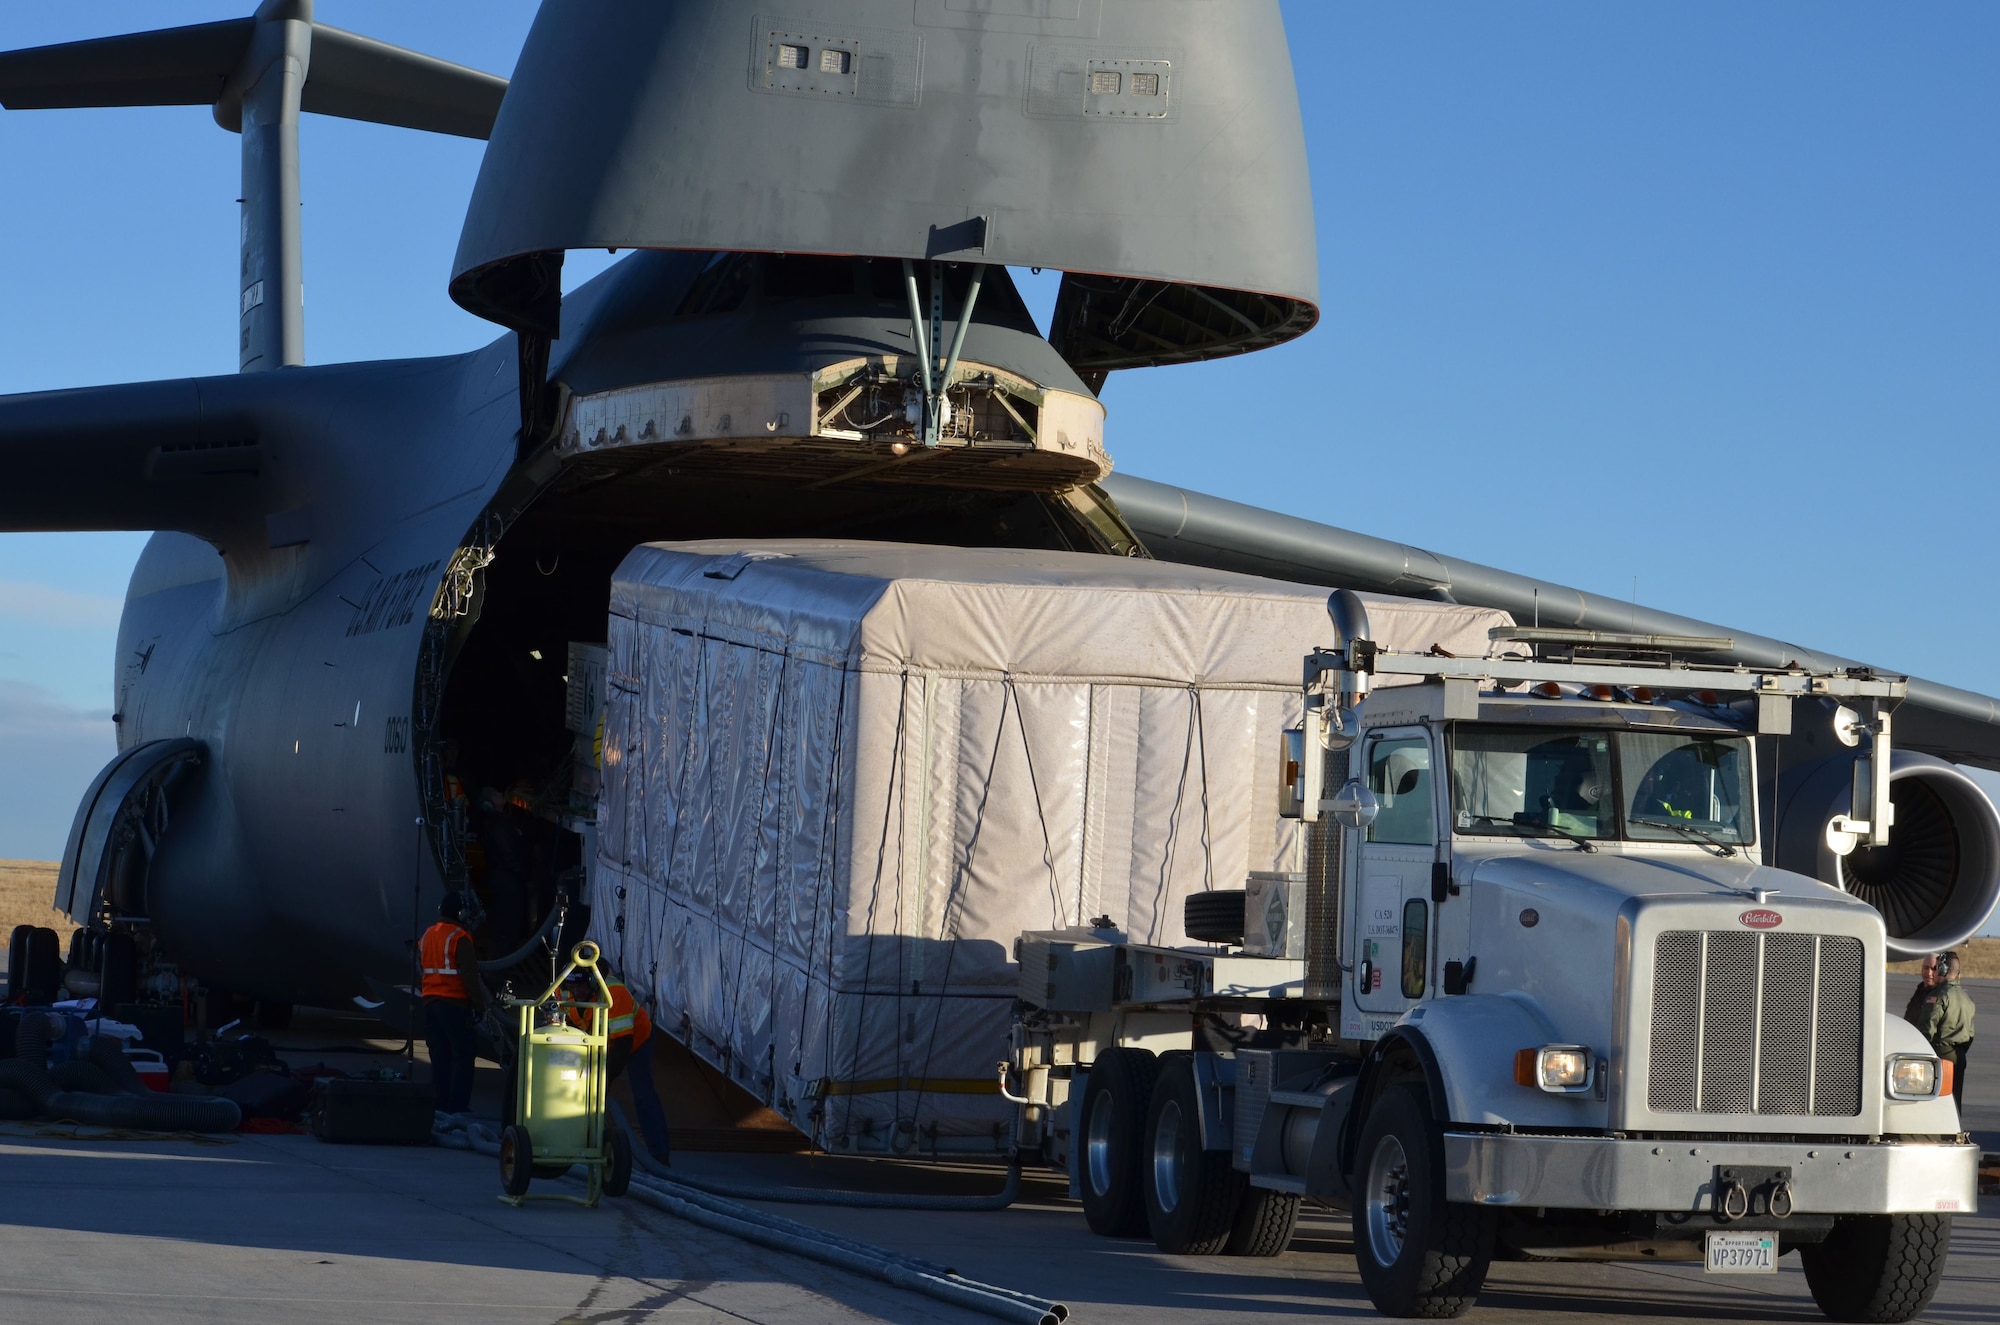 A C-5M Super Galaxy, flown by a Westover Air Reserve Base 337th Airlift Squadron crew, is seen at Buckley Air Force Base, Colo., during loading of a GOES-S weather satellite.